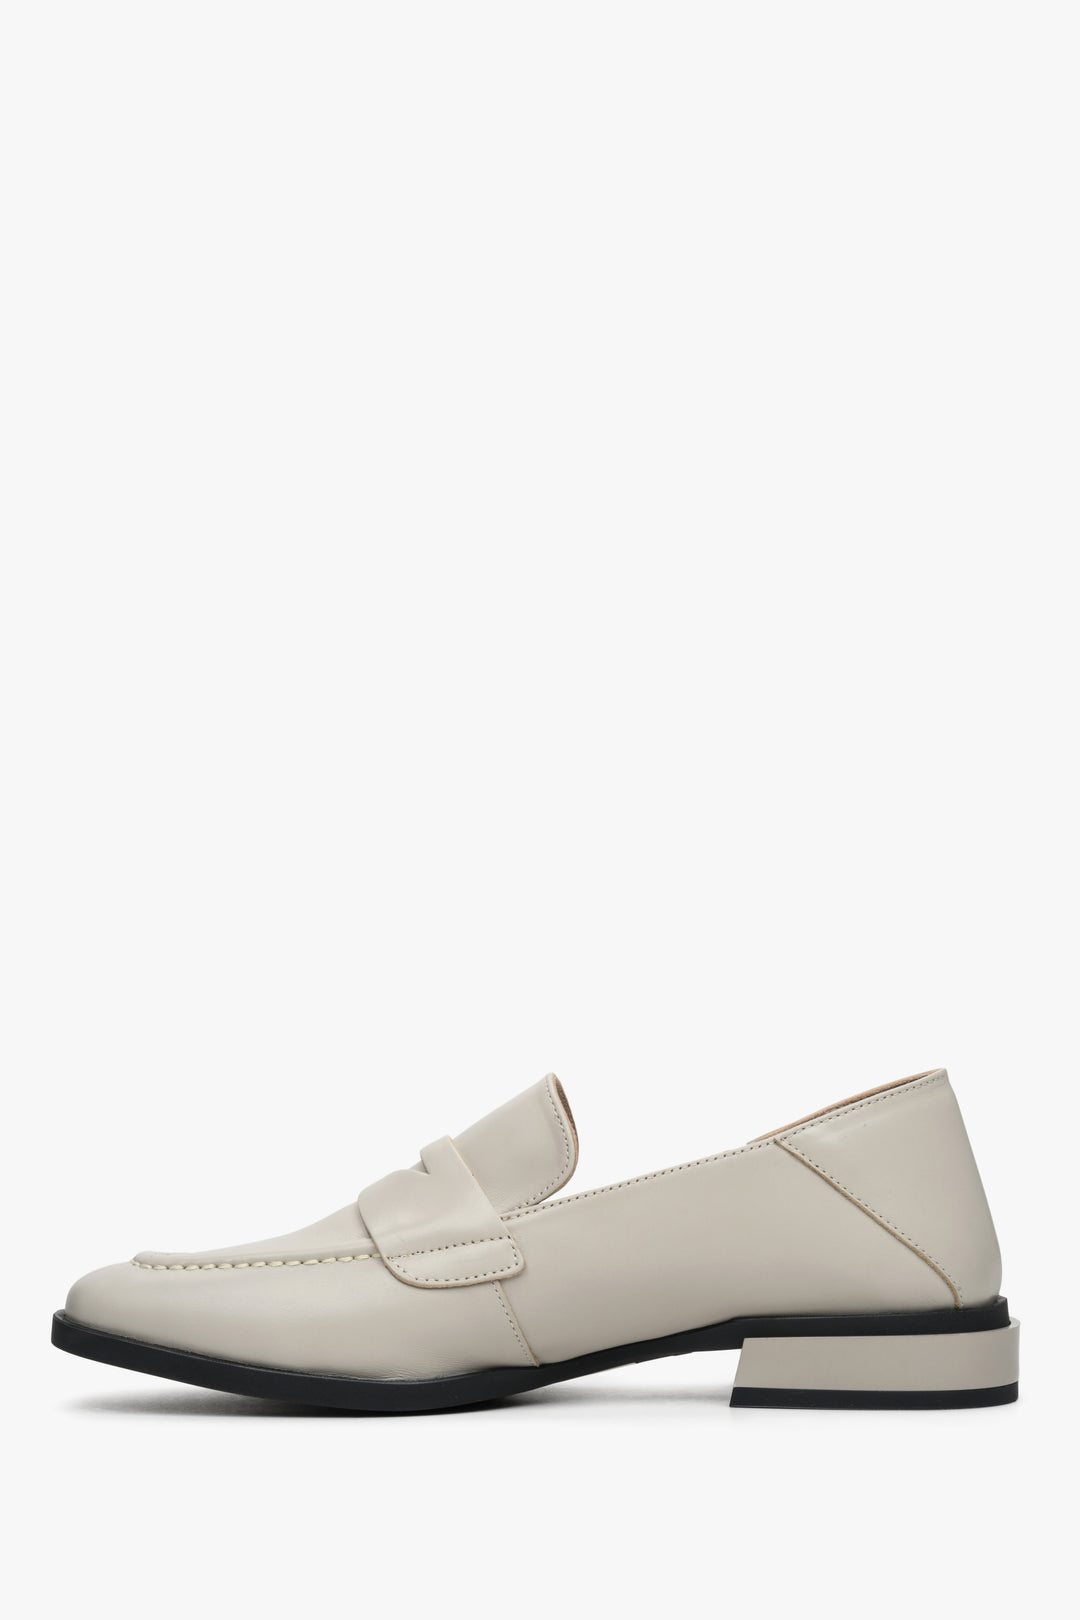 Women's beige leather loafers with a low heel by Estro - shoe profile presentation.